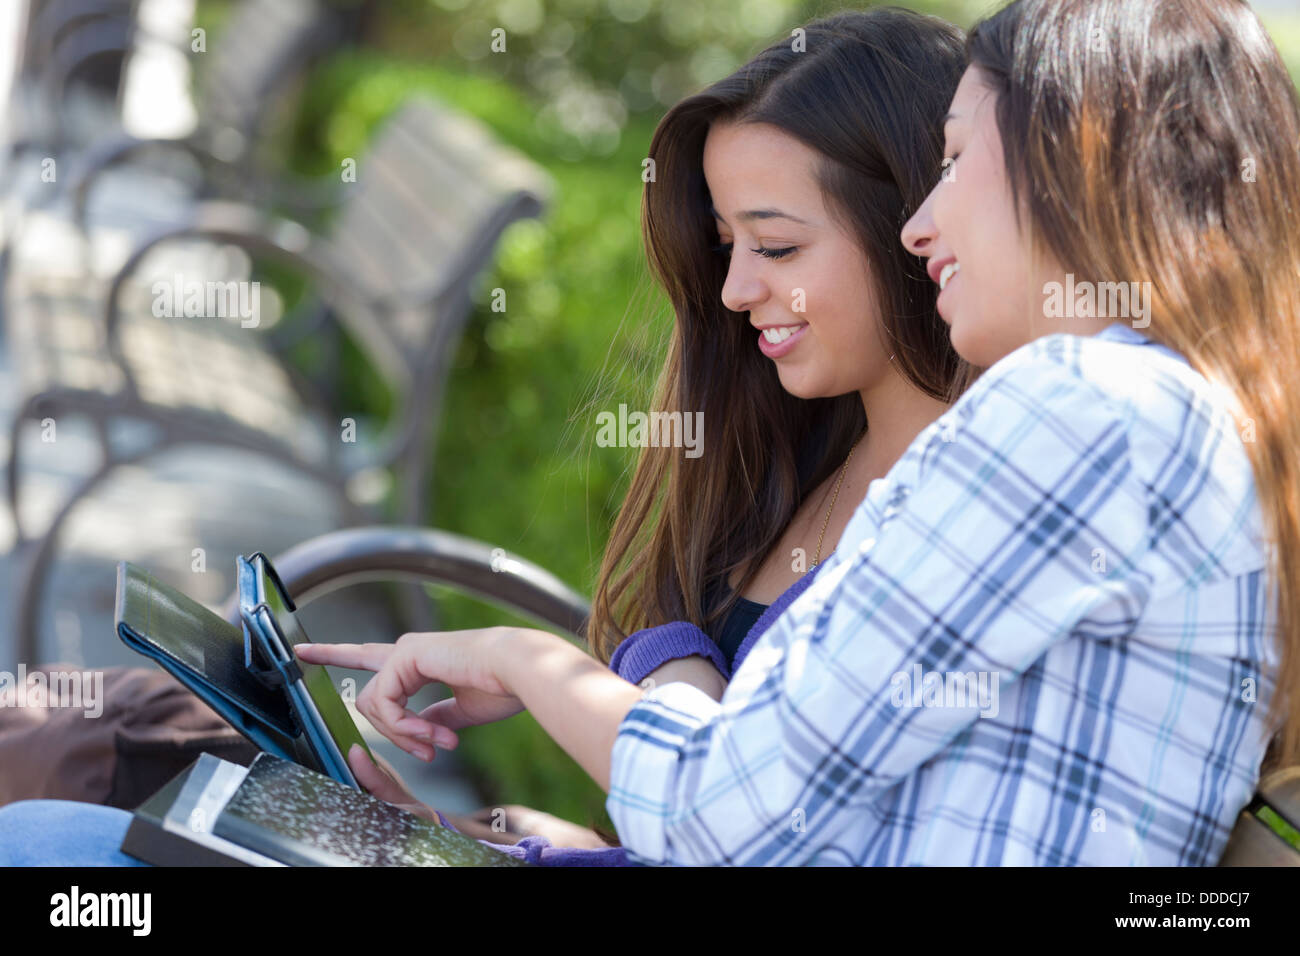 Two Happy Mixed Race Students Using Touch Pad Computer Outside Together on Campus. Stock Photo